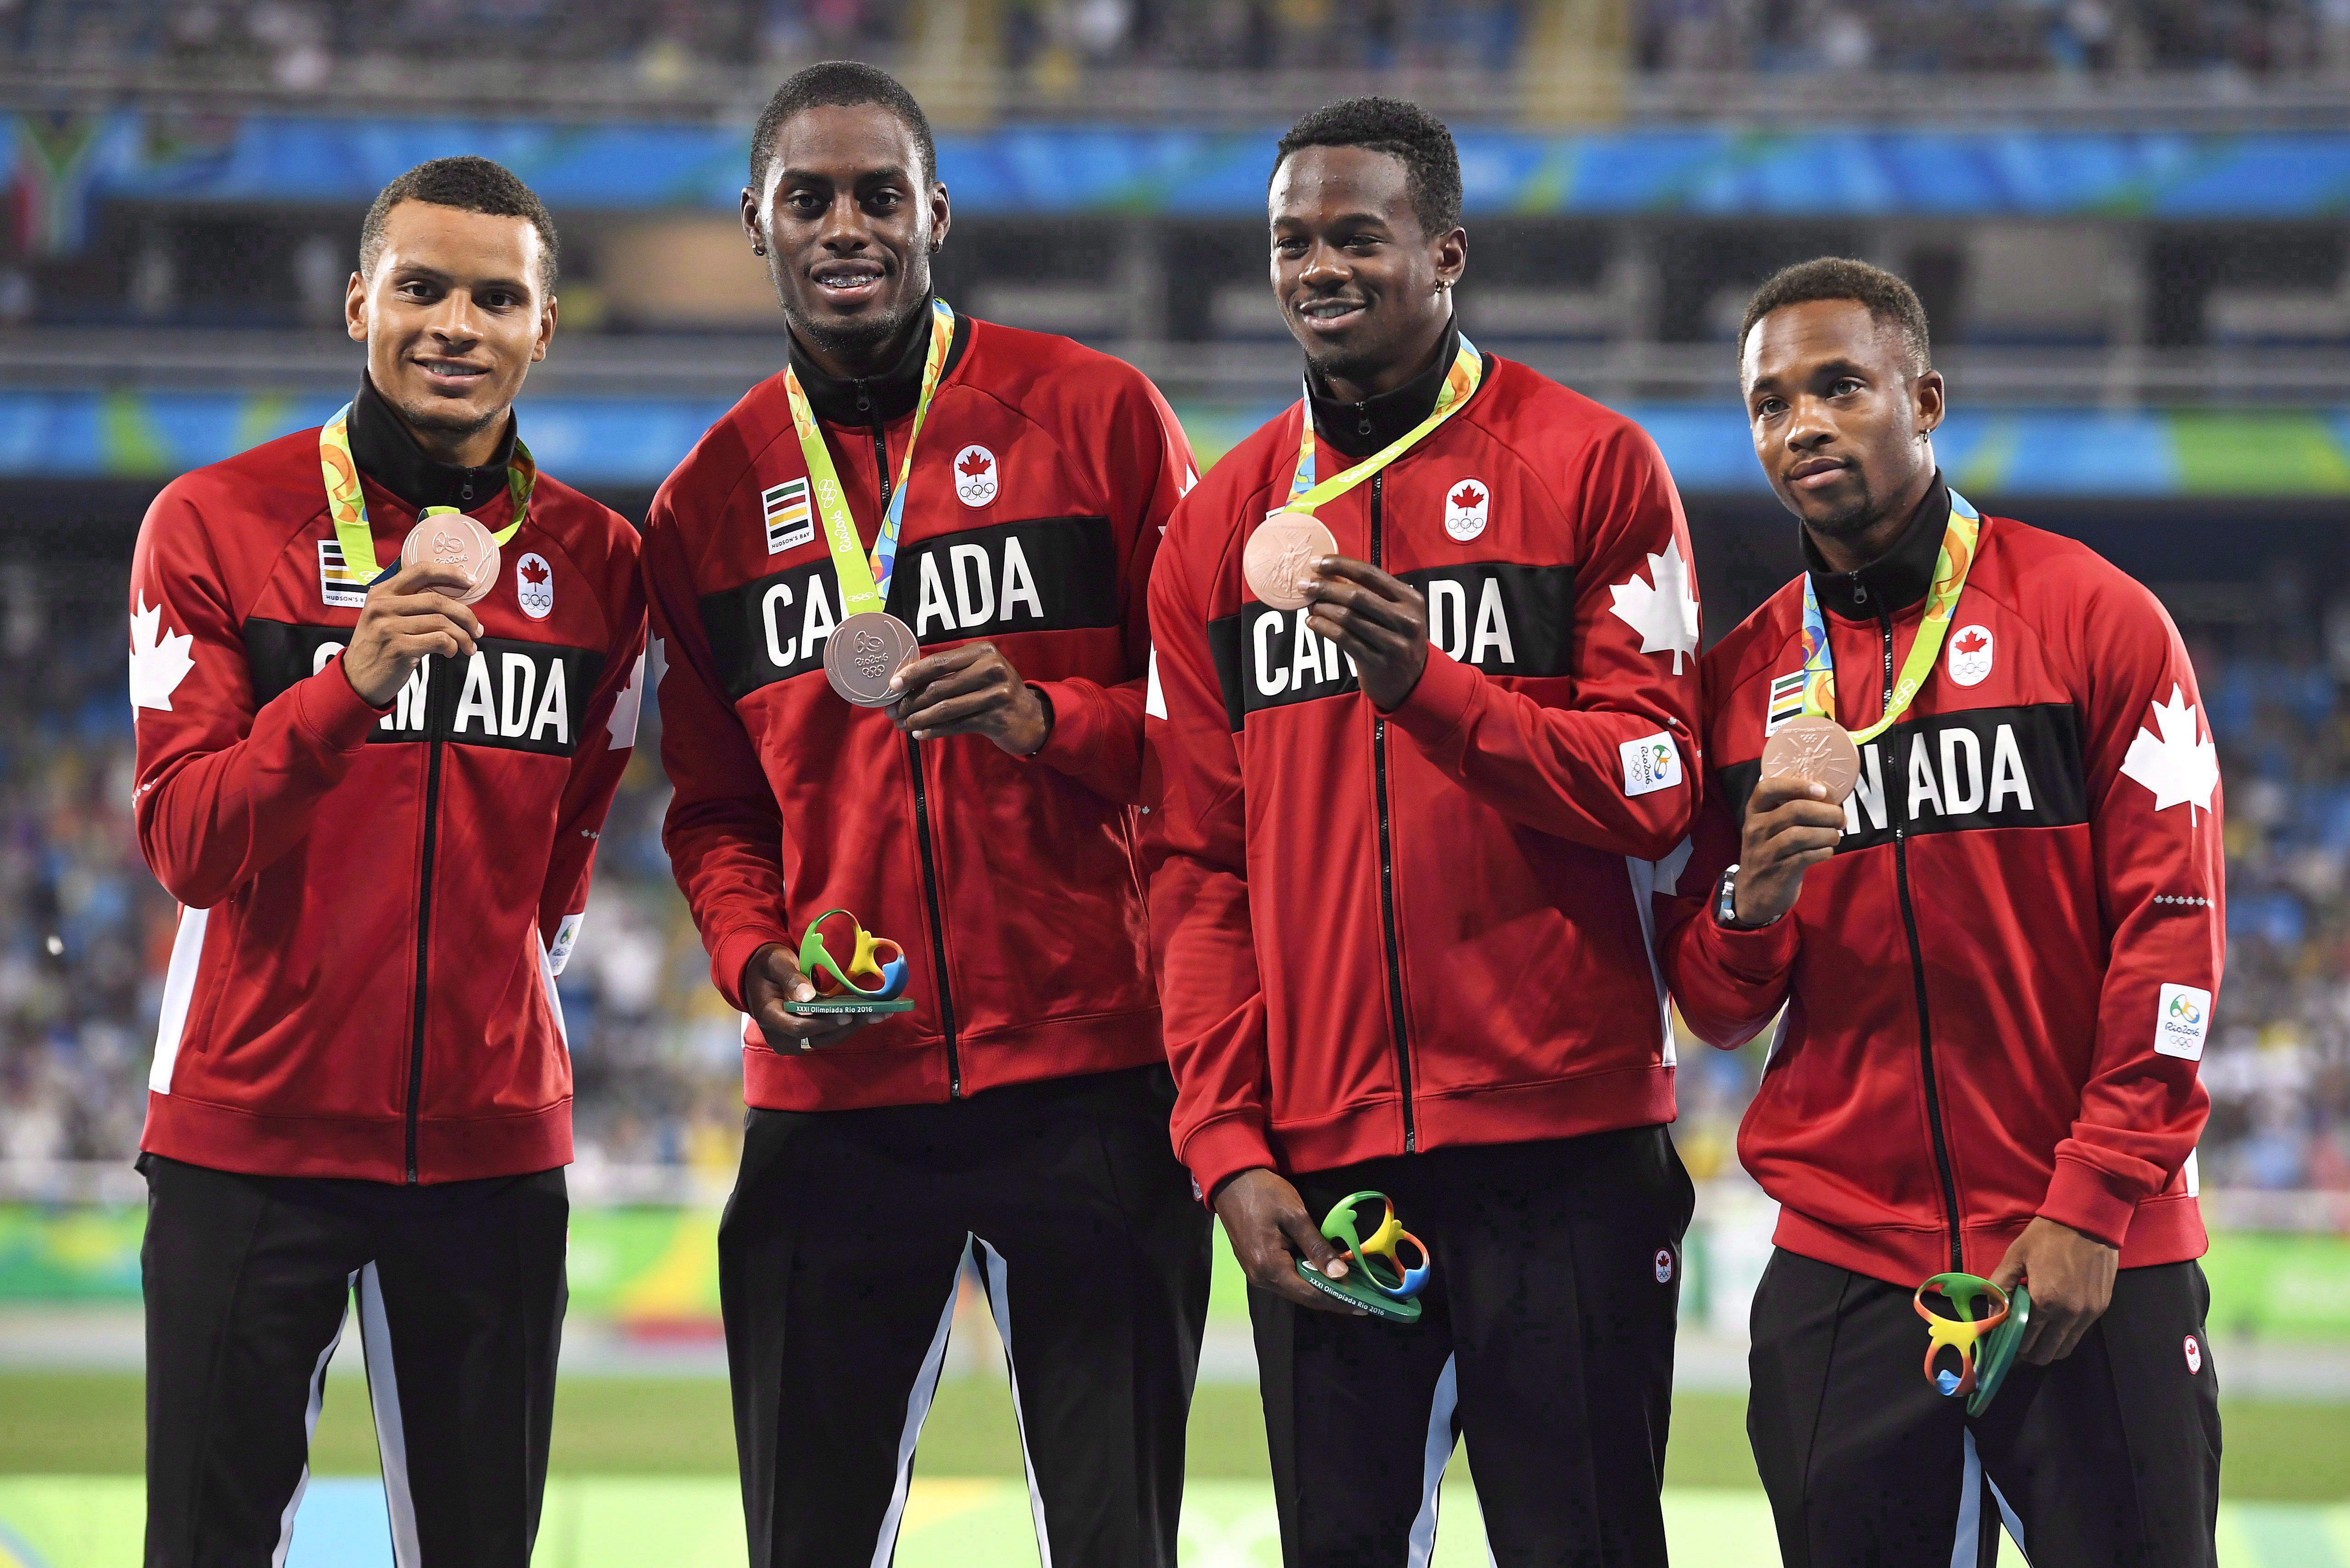 Akeem Haynes Aaron Brown, Brendon Rodney and Andre De Grasse pose with bronze medals on the podium